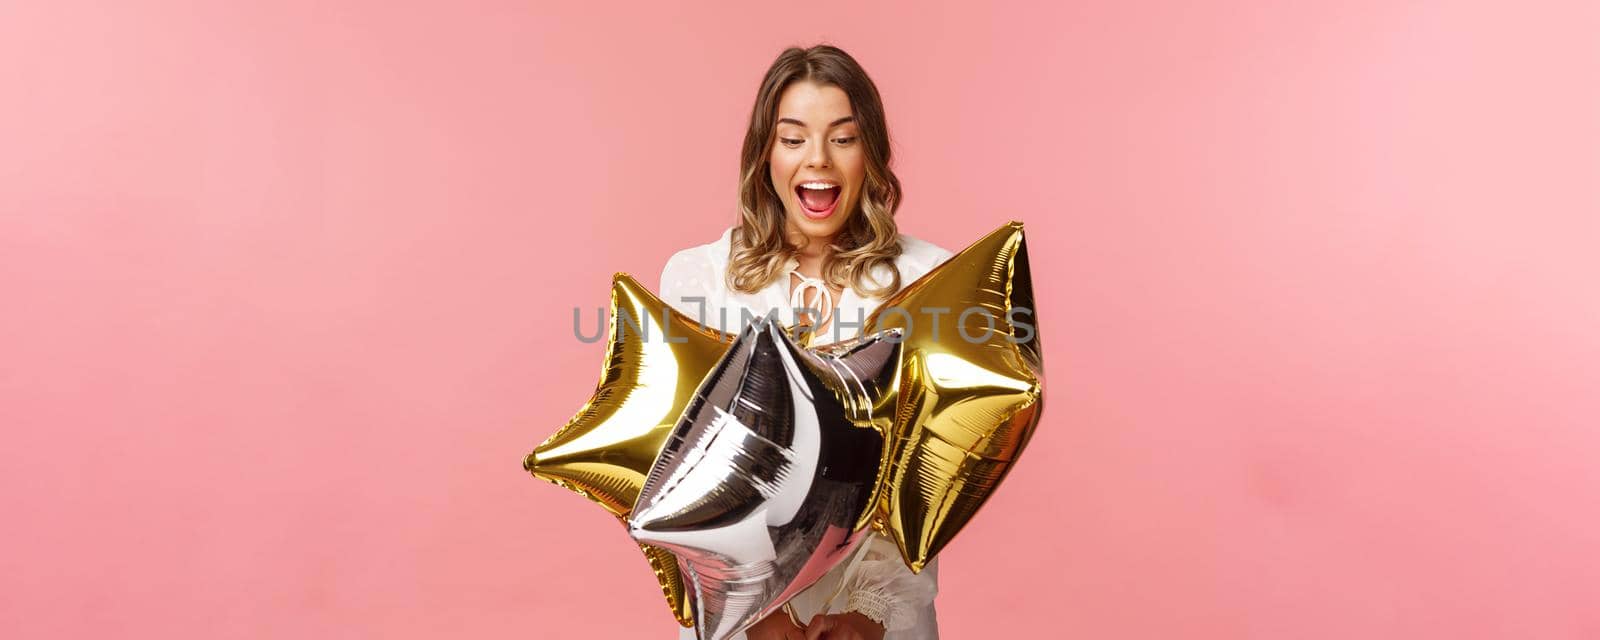 Holidays, celebration and women concept. Portrait of joyful beautiful blond girl in white dress being excited and impressed with cool start-shaped balloons, partying over pink background.